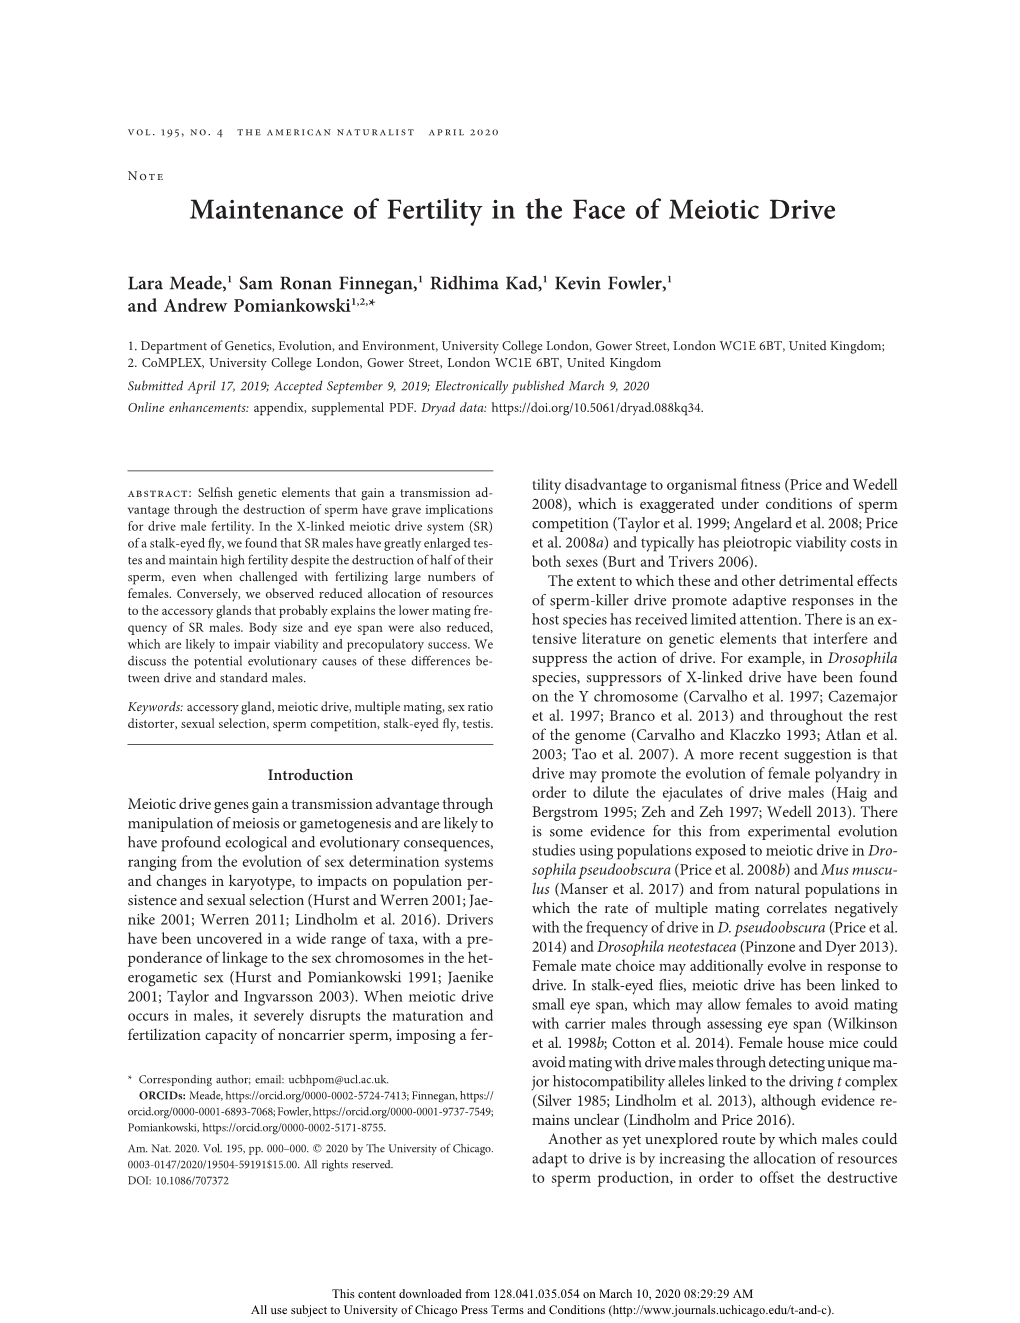 Maintenance of Fertility in the Face of Meiotic Drive